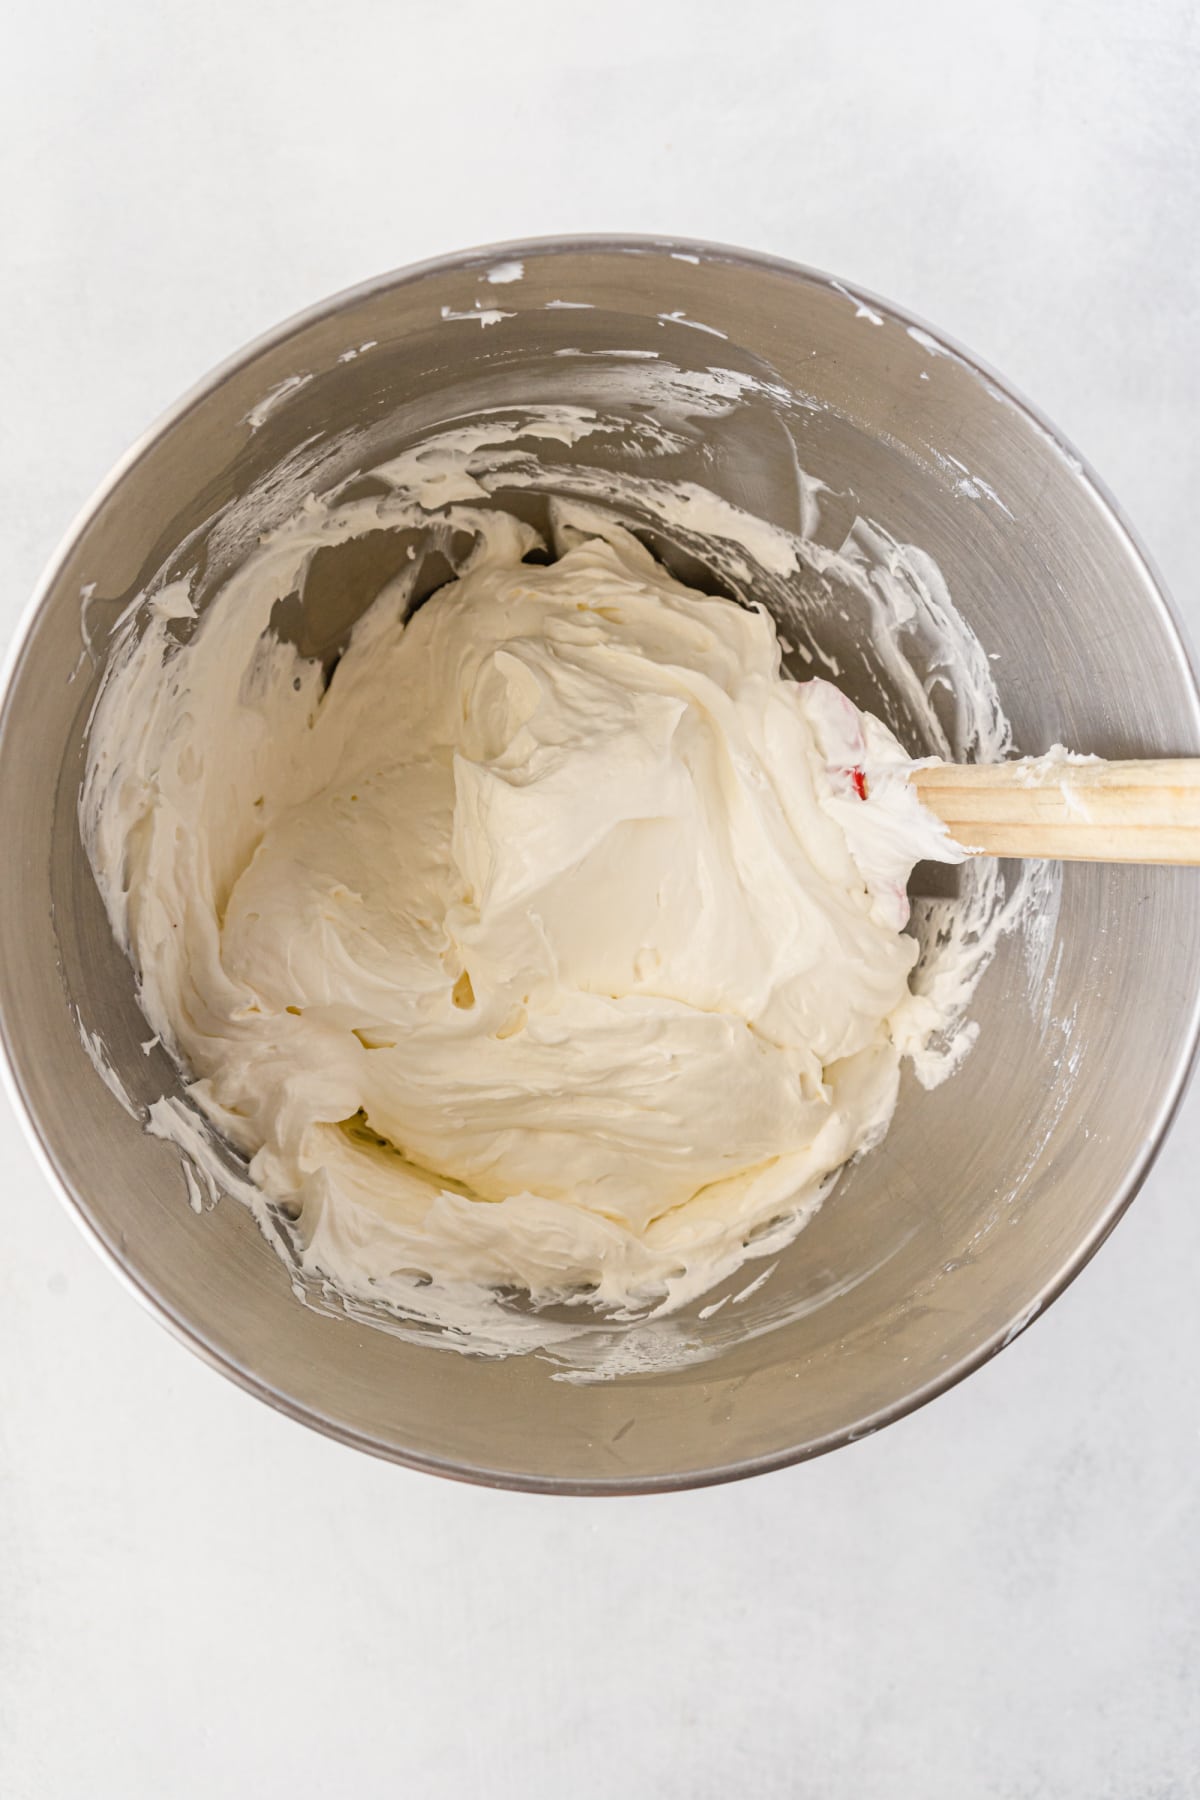 Cool whip added to cream cheese mixture